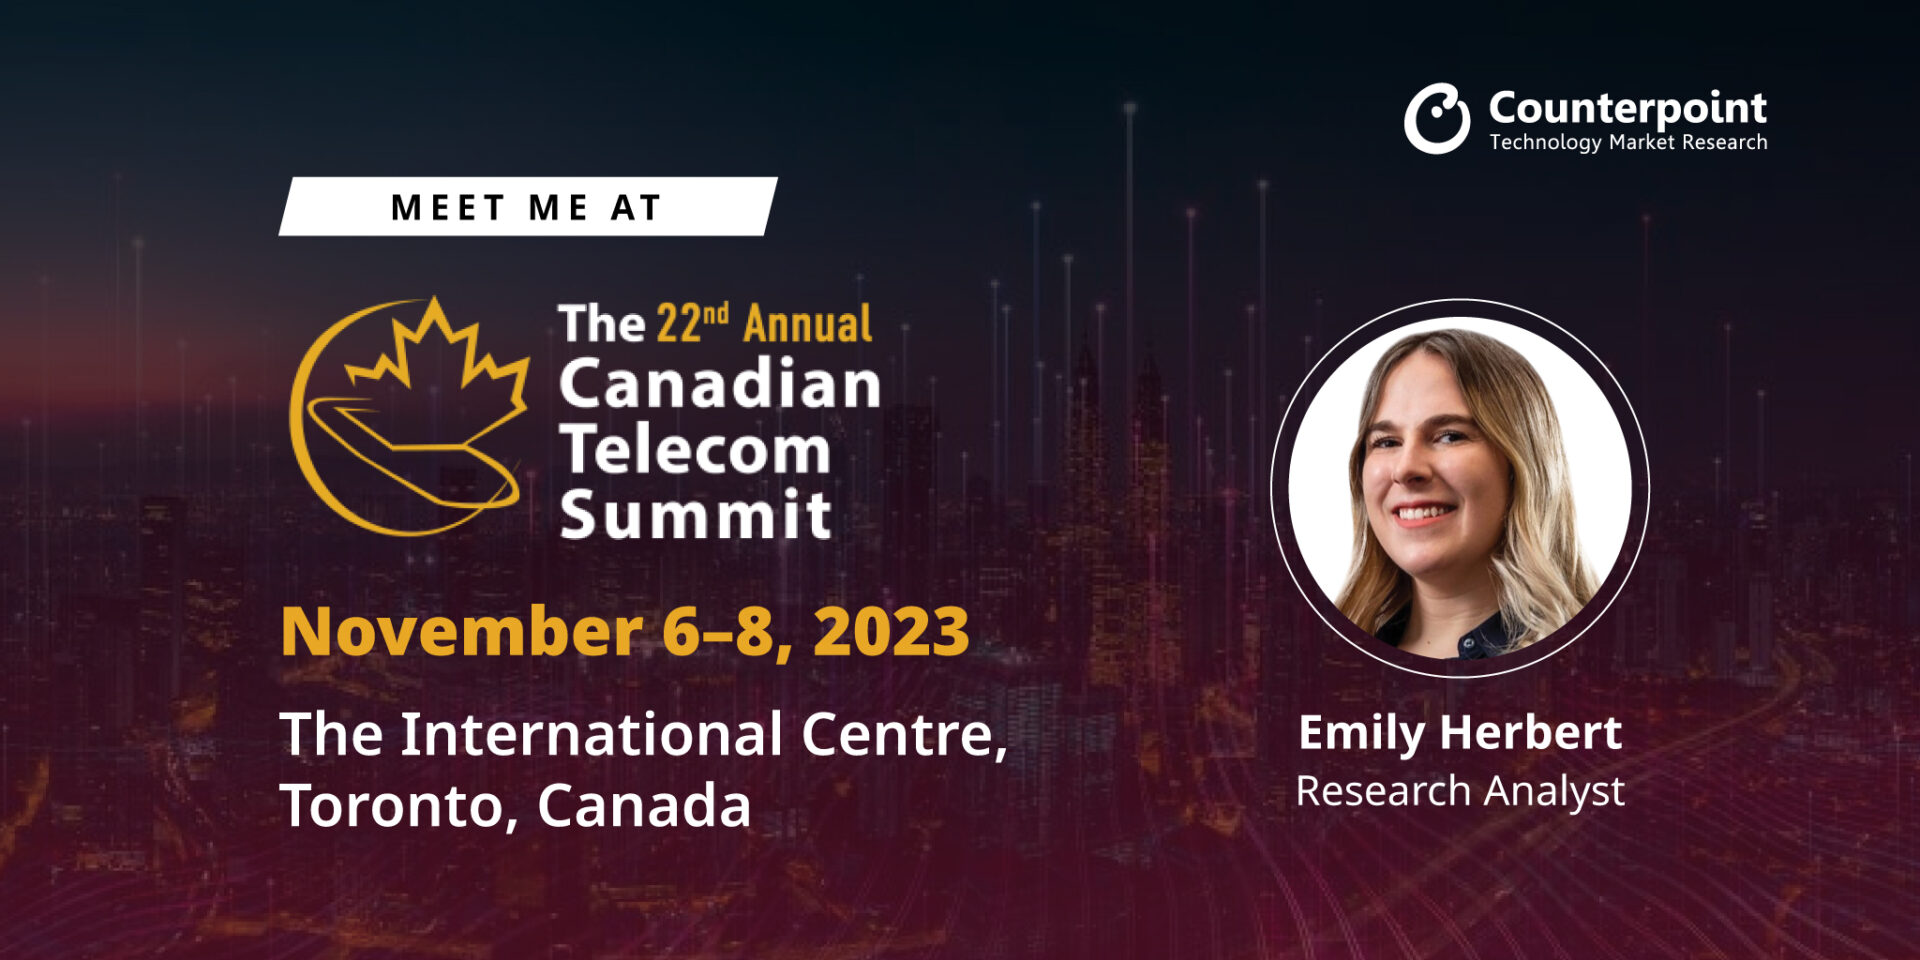 Meet Counterpoint Research at the 22nd Annual Canadian Telecom Summit